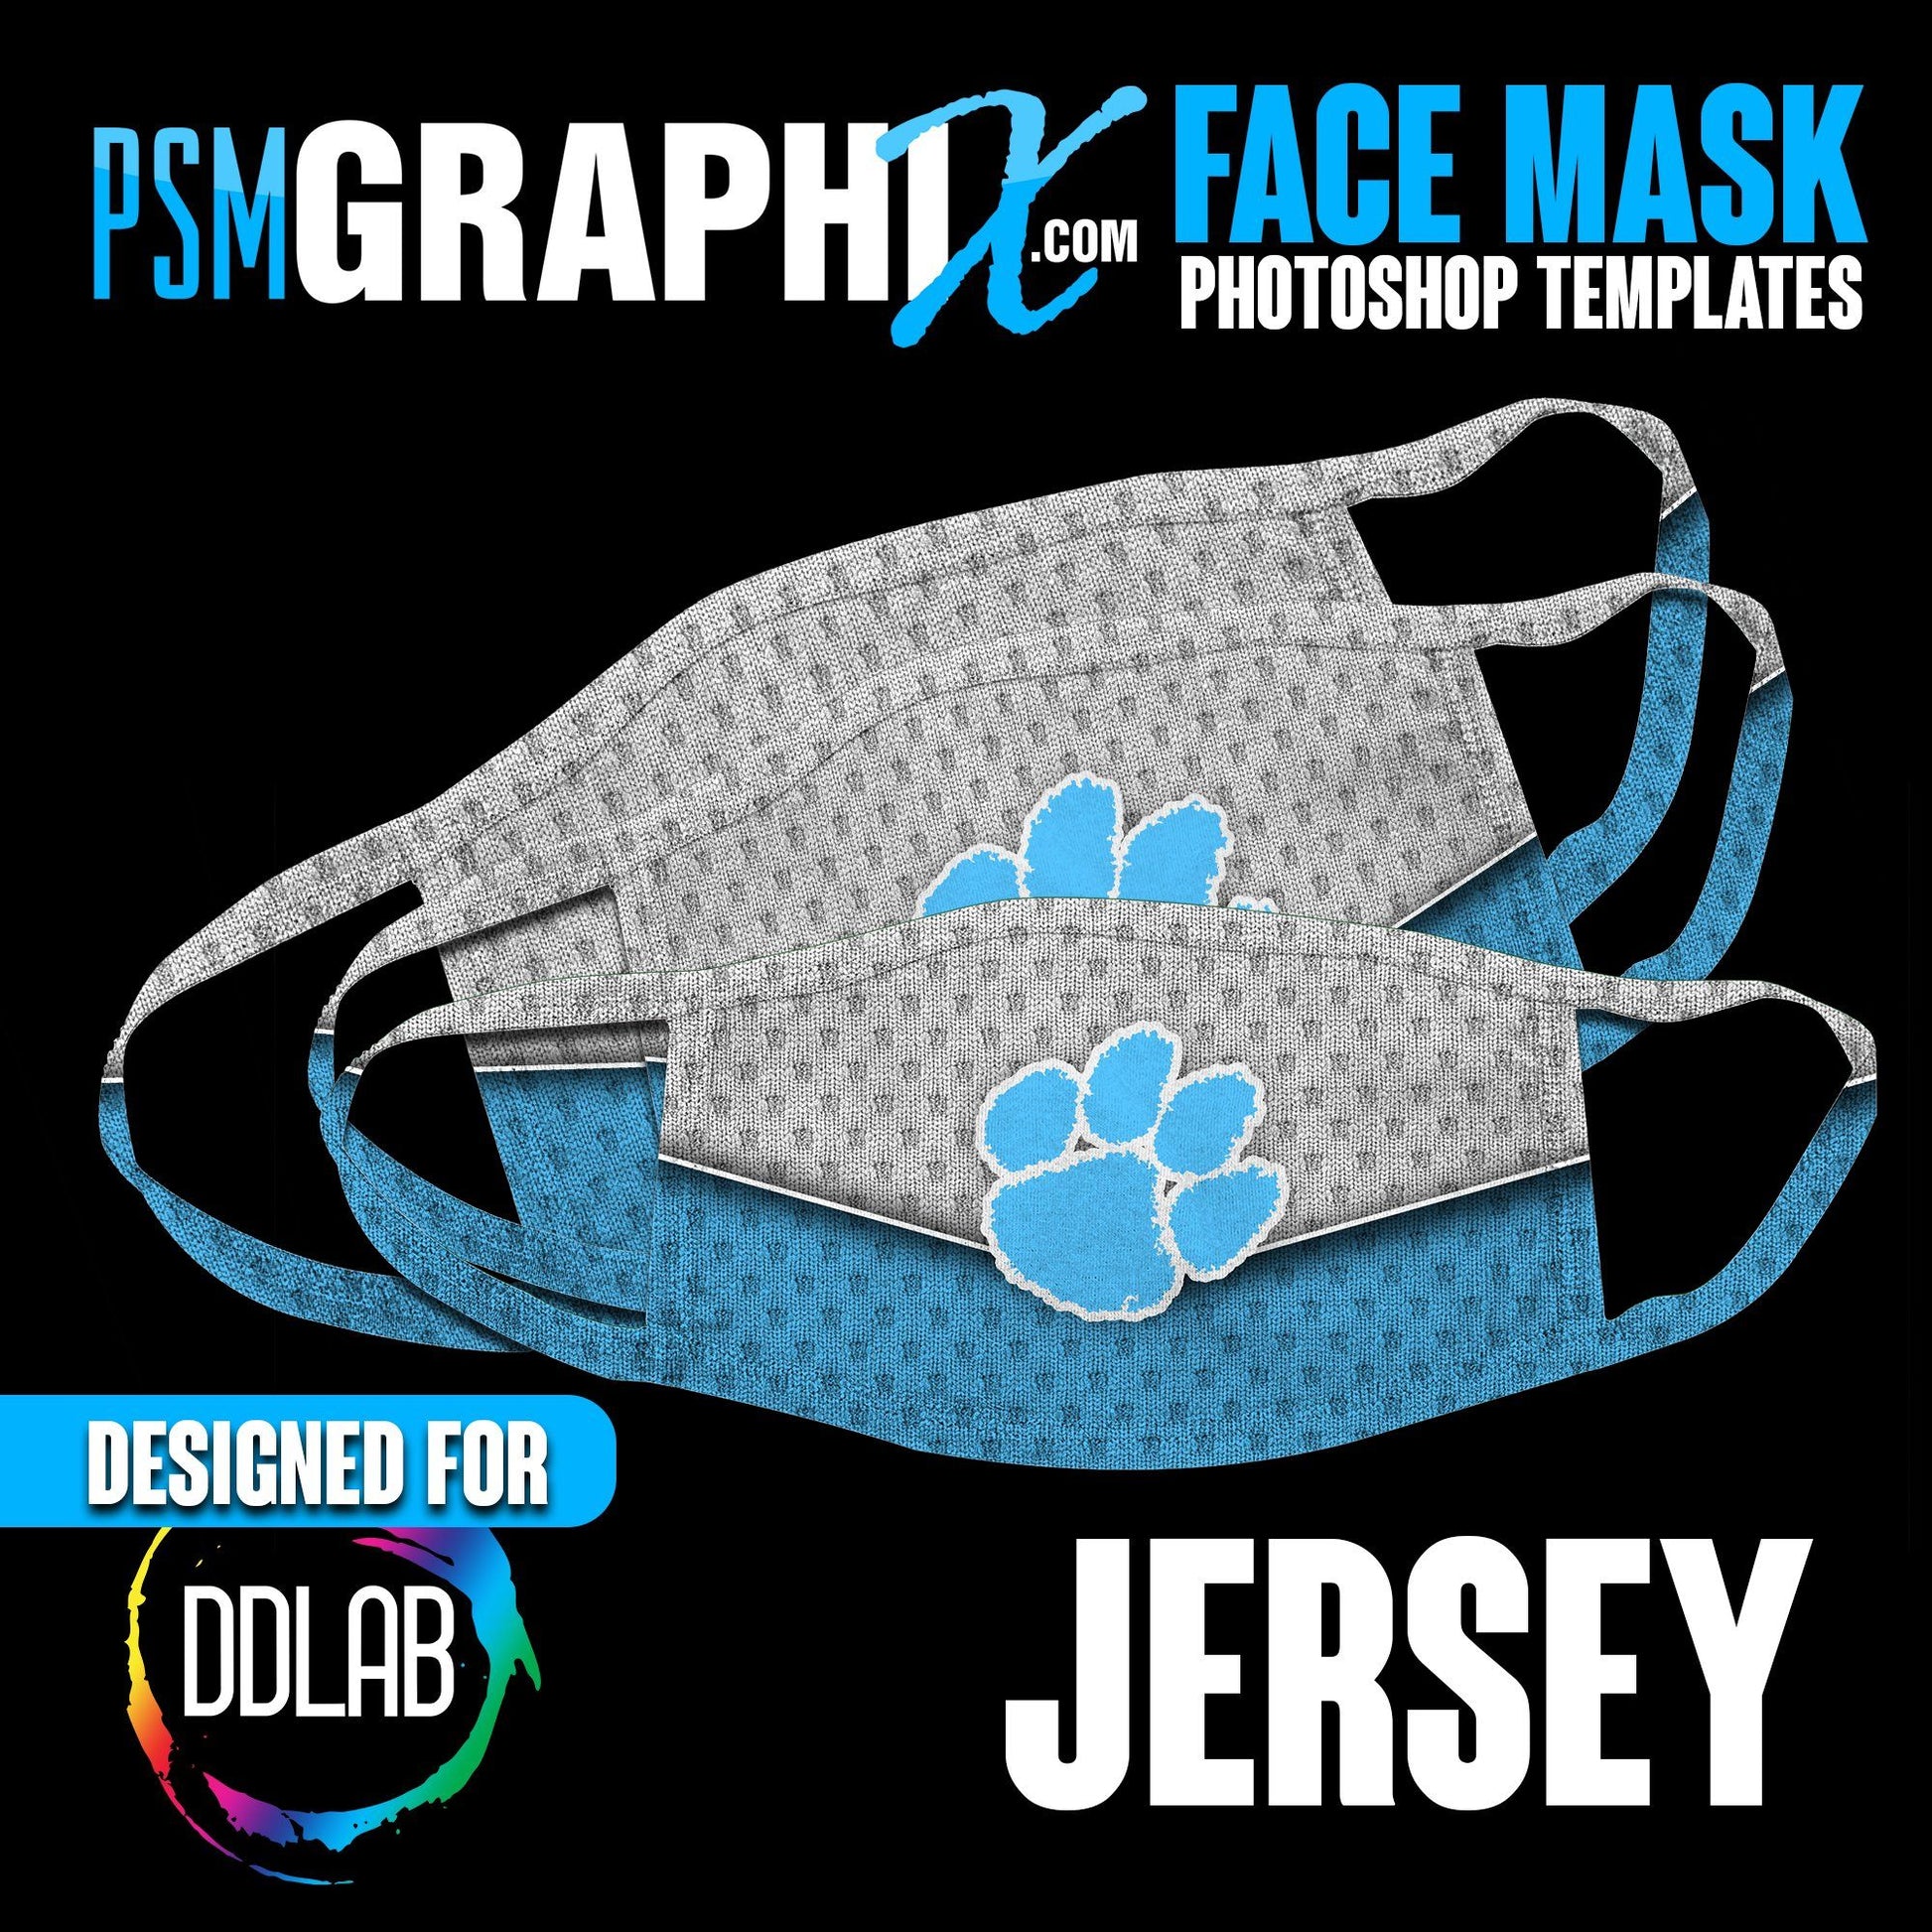 Jersey - Face Mask Template Set (DDLAB) 3 Sizes-Photoshop Template - PSMGraphix